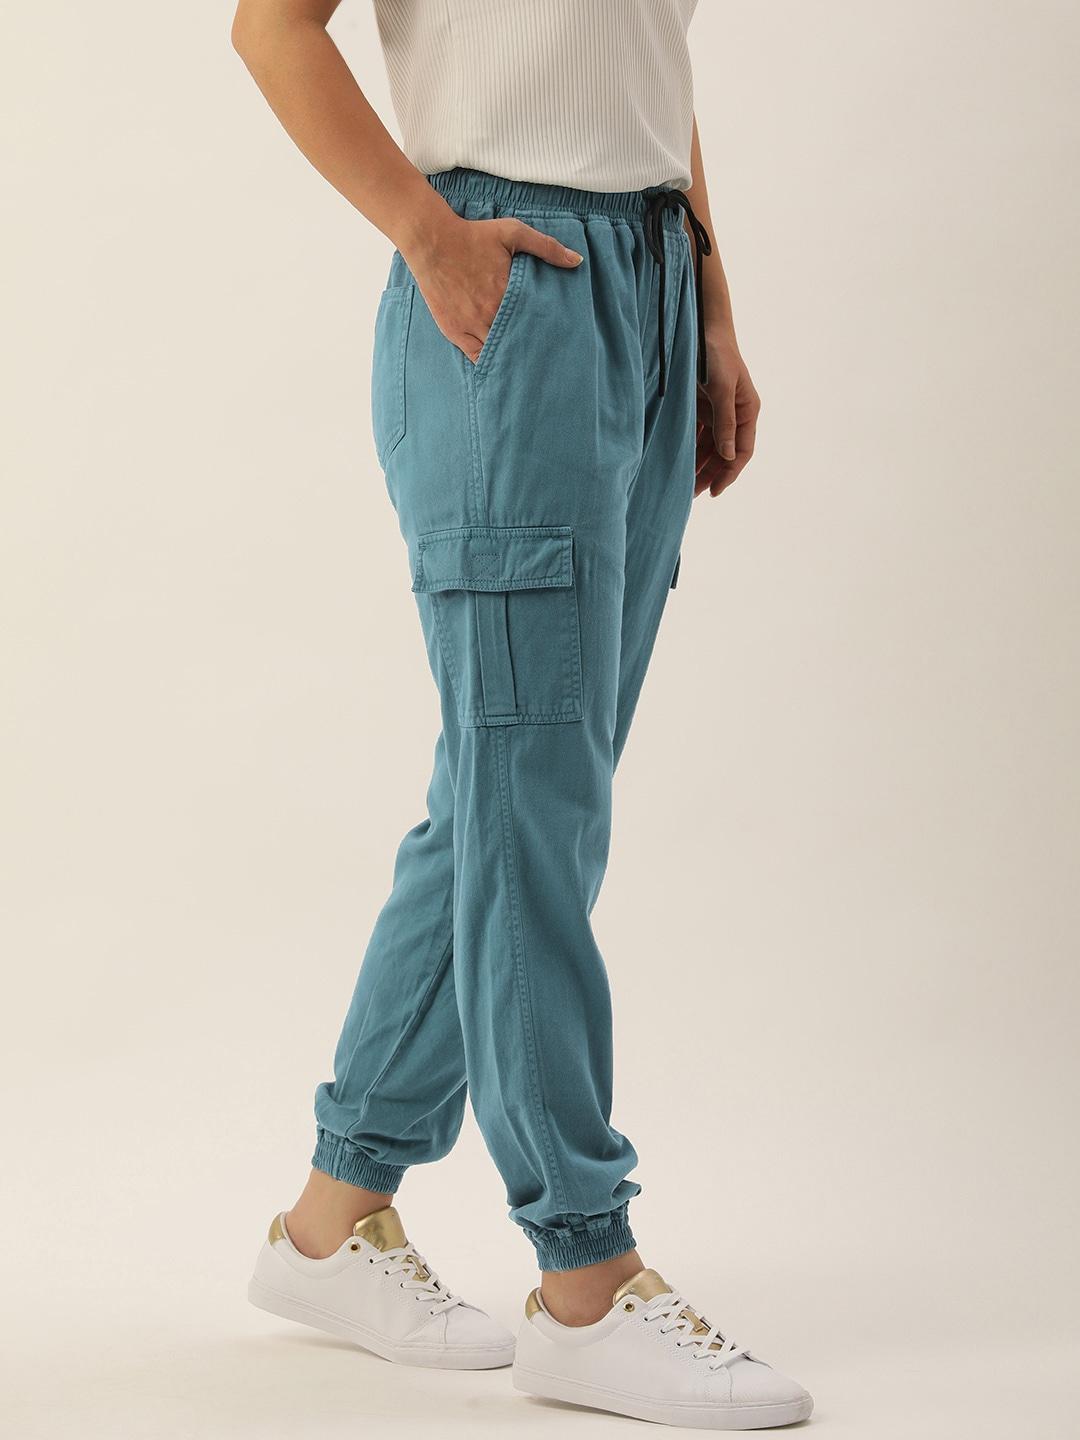 ivoc women teal blue solid pure cotton cargos trousers